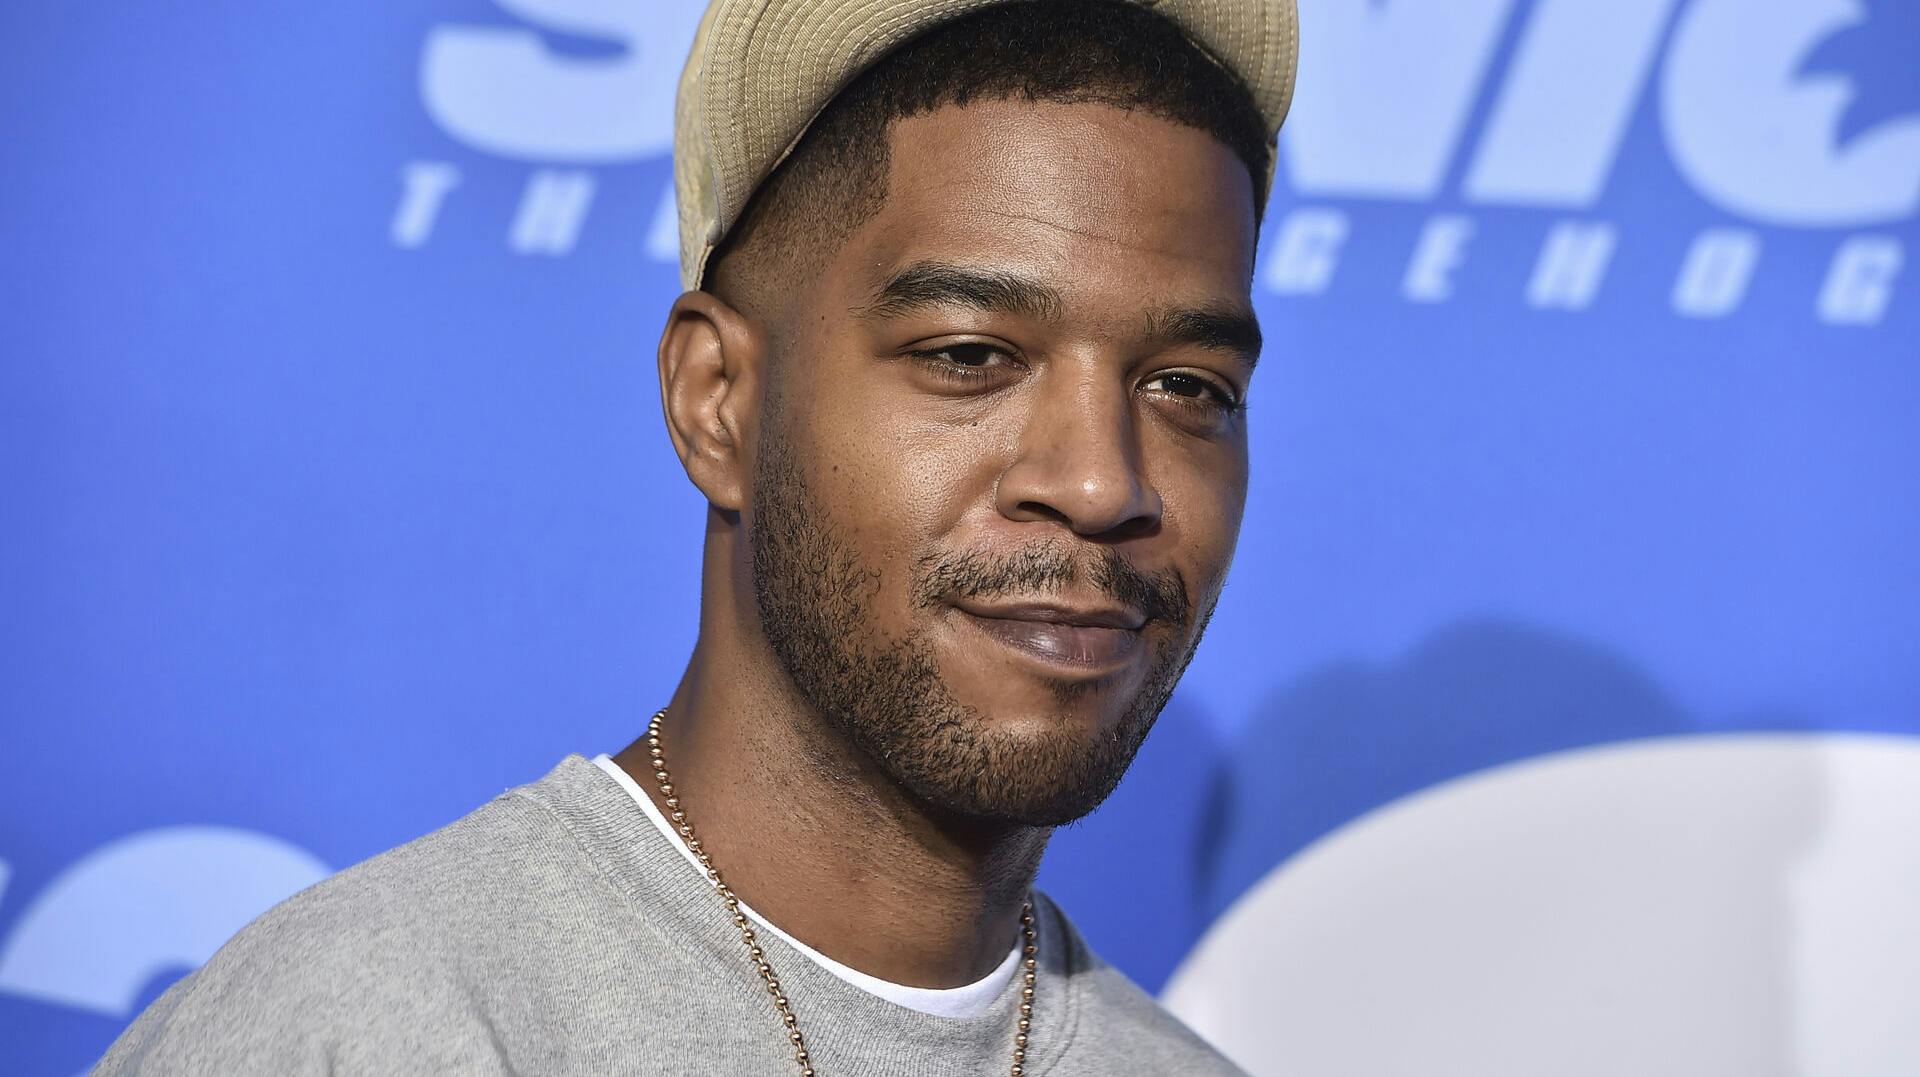 FILE - Kid Cudi appears at the Los Angeles premiere of "Sonic The Hedgehog 2, " on April 5, 2022. Cudi created and stars in the animated Netflix film "Entergalactic." (Photo by Jordan Strauss/Invision/AP, File)